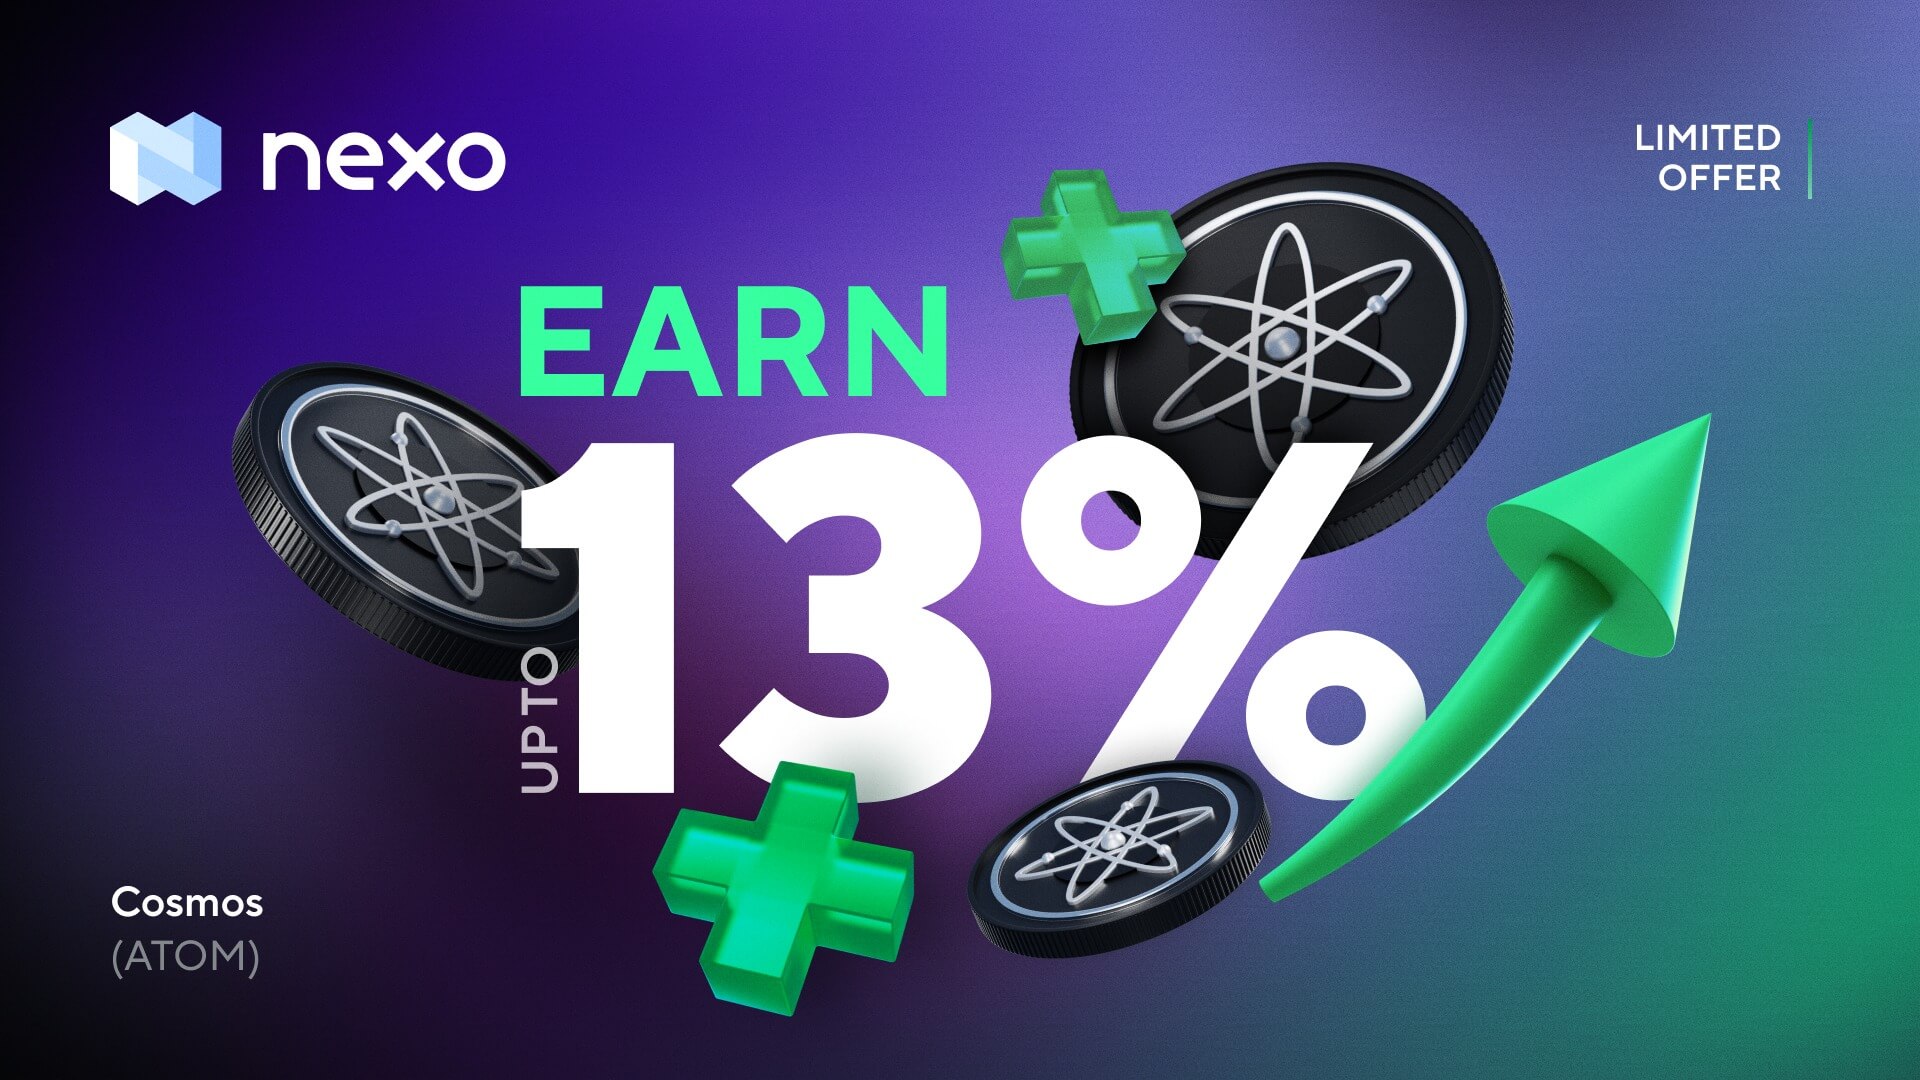 Get Cosmic Yield: Earn up to 13% on ATOM